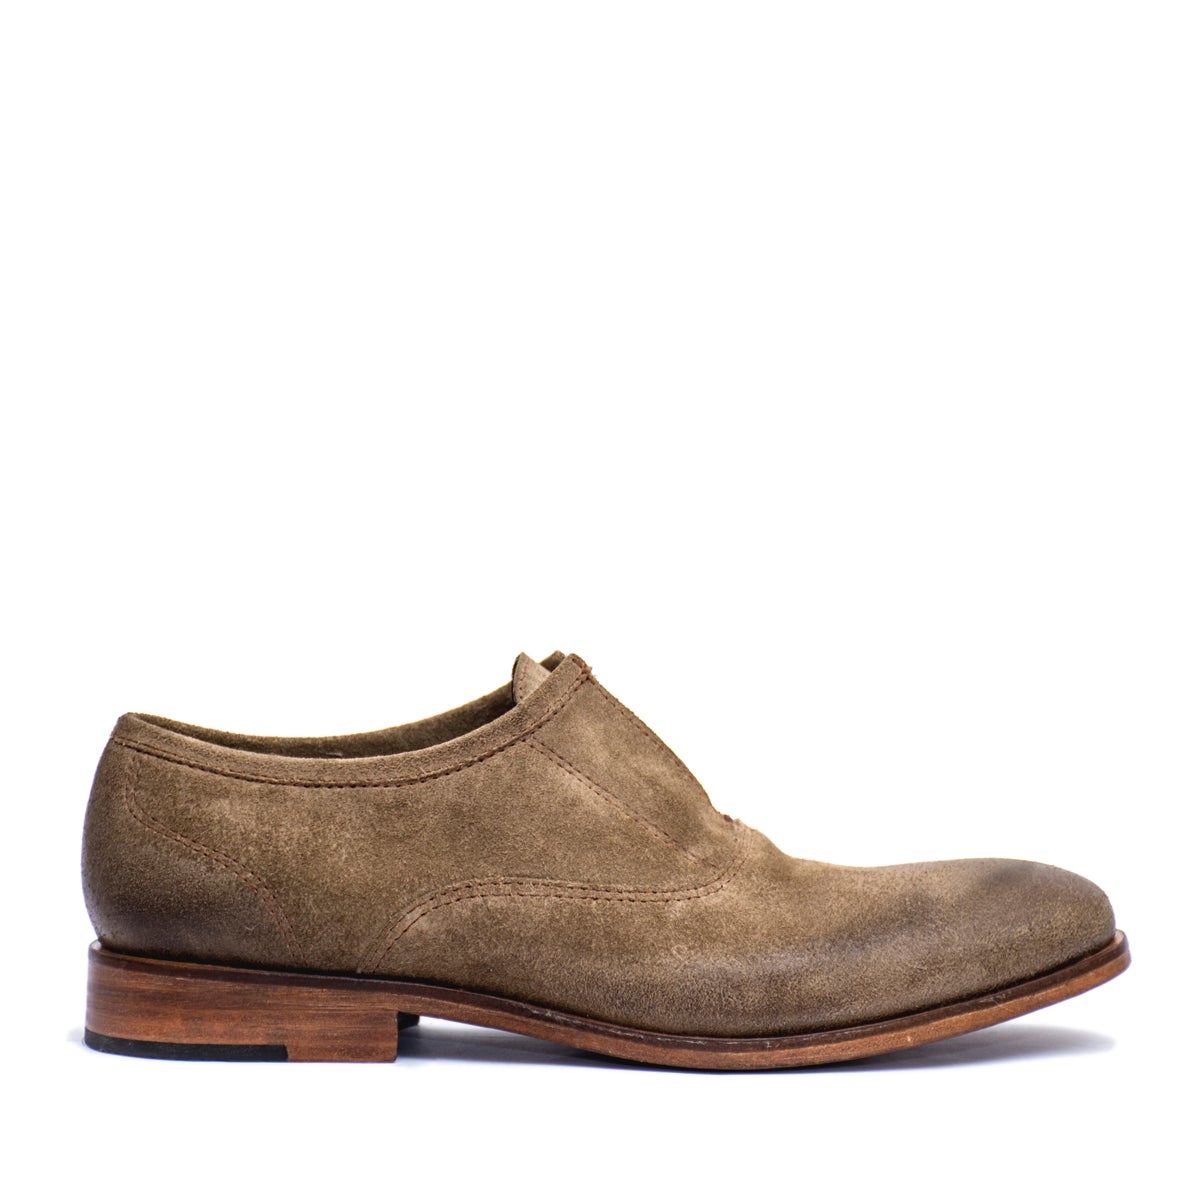 Chelo Dune - Leather Shoes